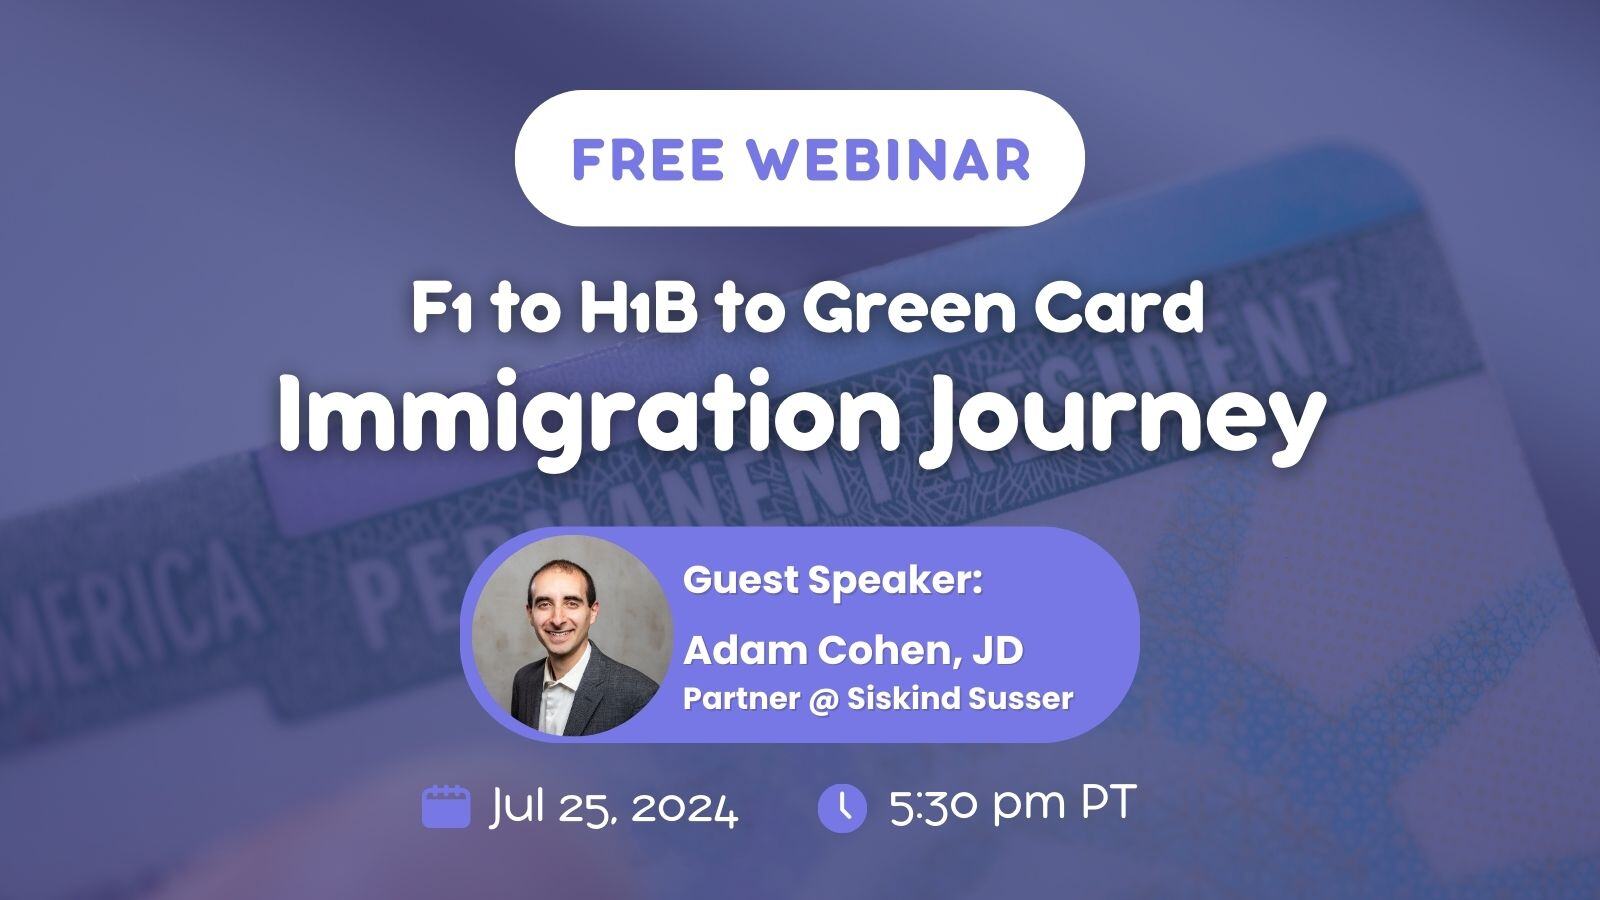 Immigration Journey through US Employment : F1 to H1B to Green Card